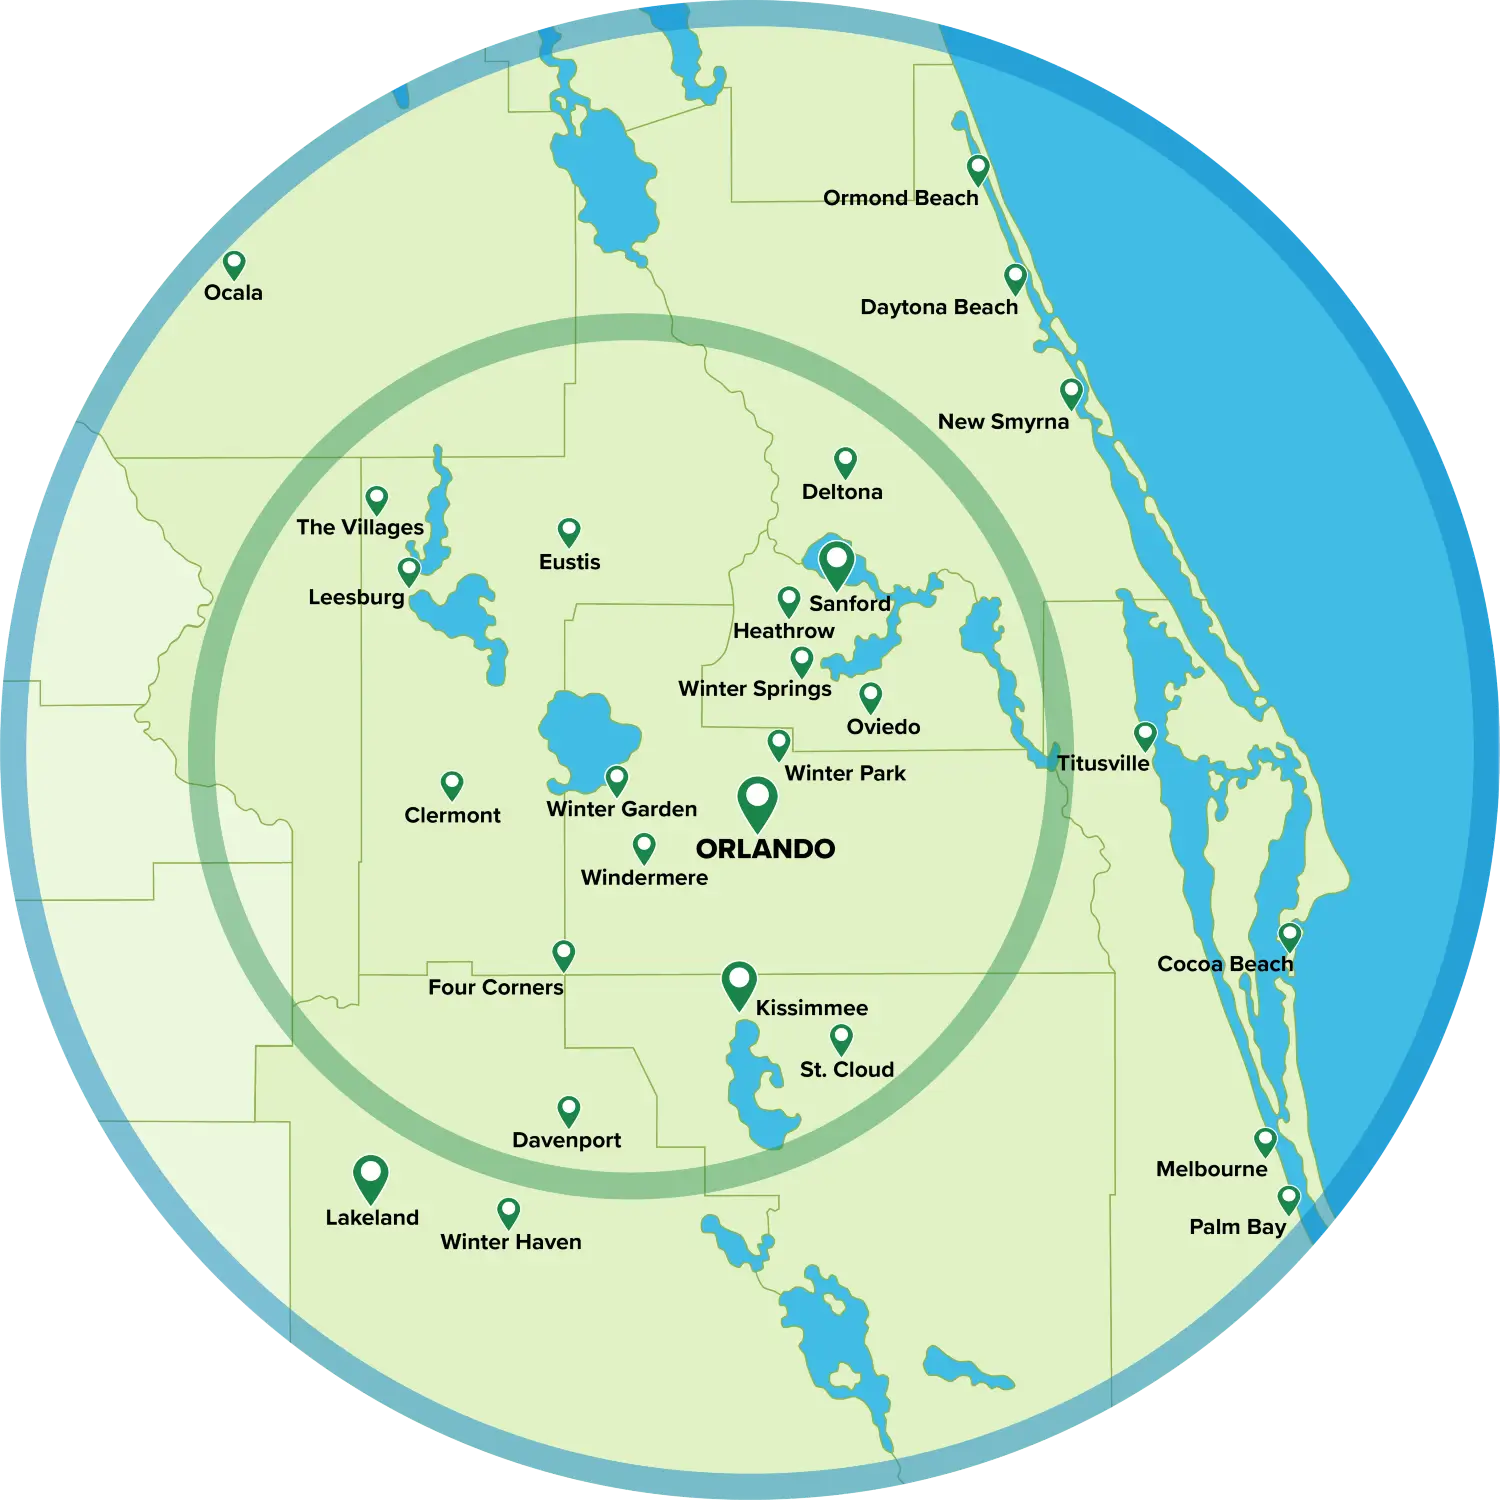 Sorko Services service area map - Local Pest Control and Pond Management in the Greater Orlando area - Sanford | Orlando | Winter Park | Oviedo | Heathrow | Kissimmee | Winter Springs | Clermont | Winter Garden | Windermere | Deltona | St Cloud | Four Corners | The Villages | Leesburg | Eustis | Titusville | Melbourne | Palm Bay | Orange County | Seminole County | Lake County | Osceola County | Volusia County | Polk County | Marion County